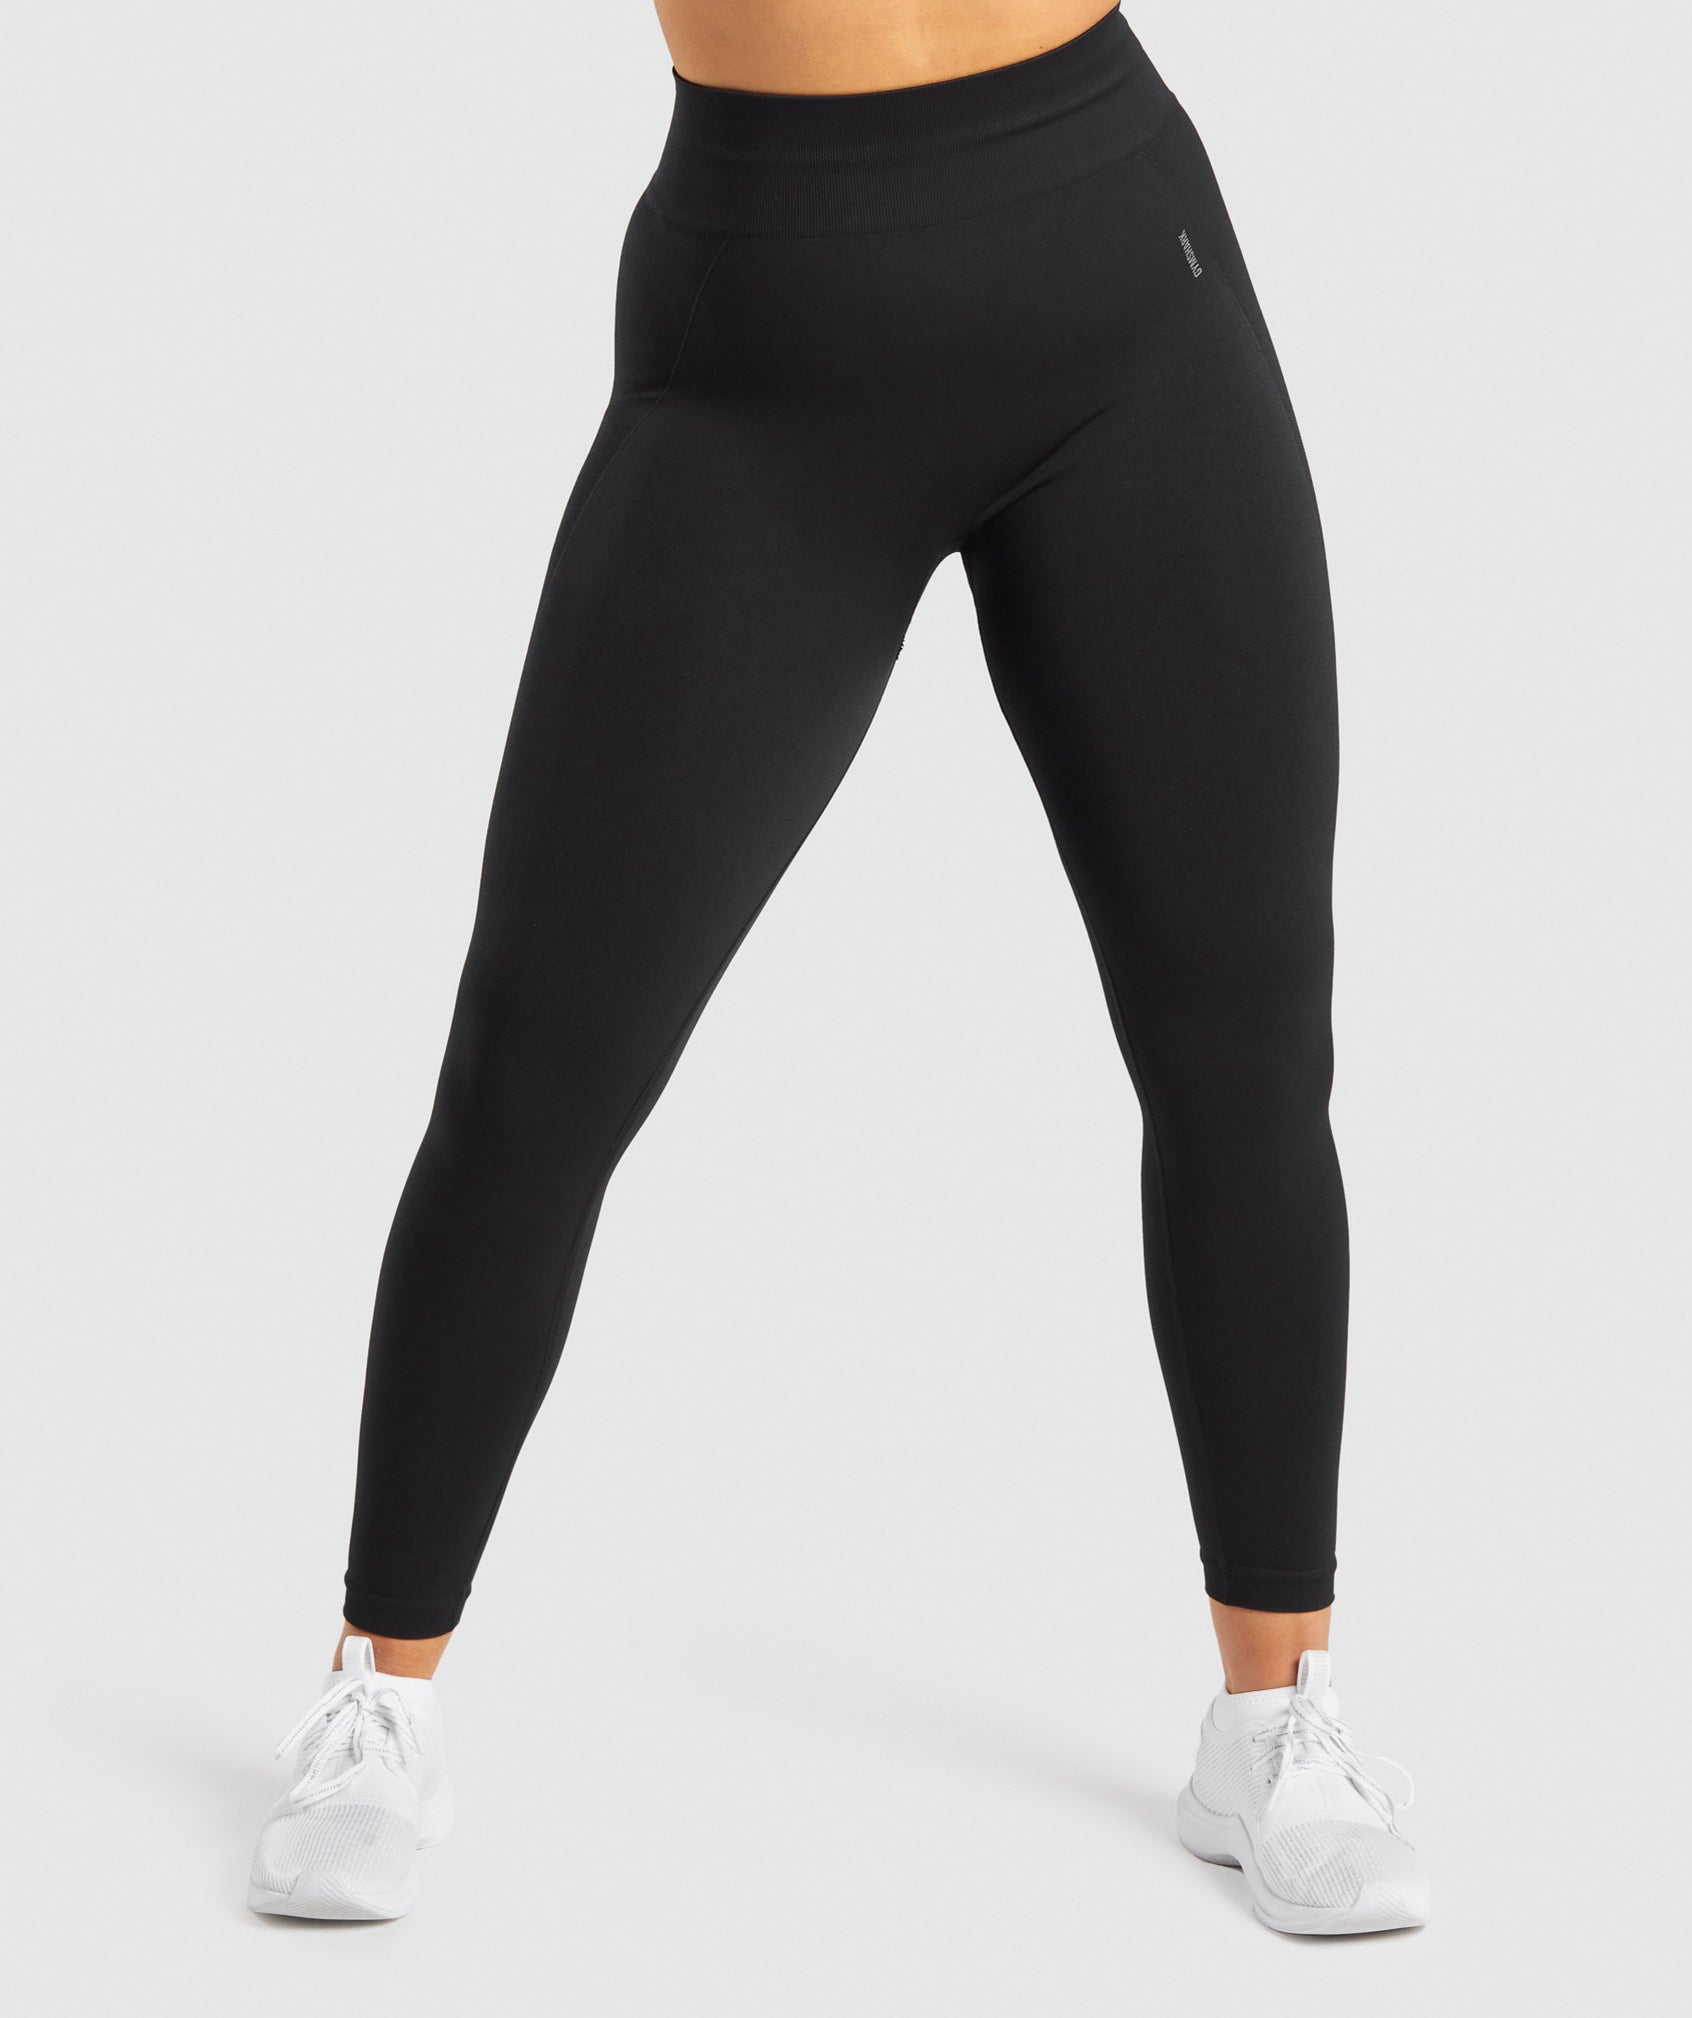 Gymshark Luxe Bottoms Black/Graphite Lounge Womens Xlarge Size XL - $50 -  From W